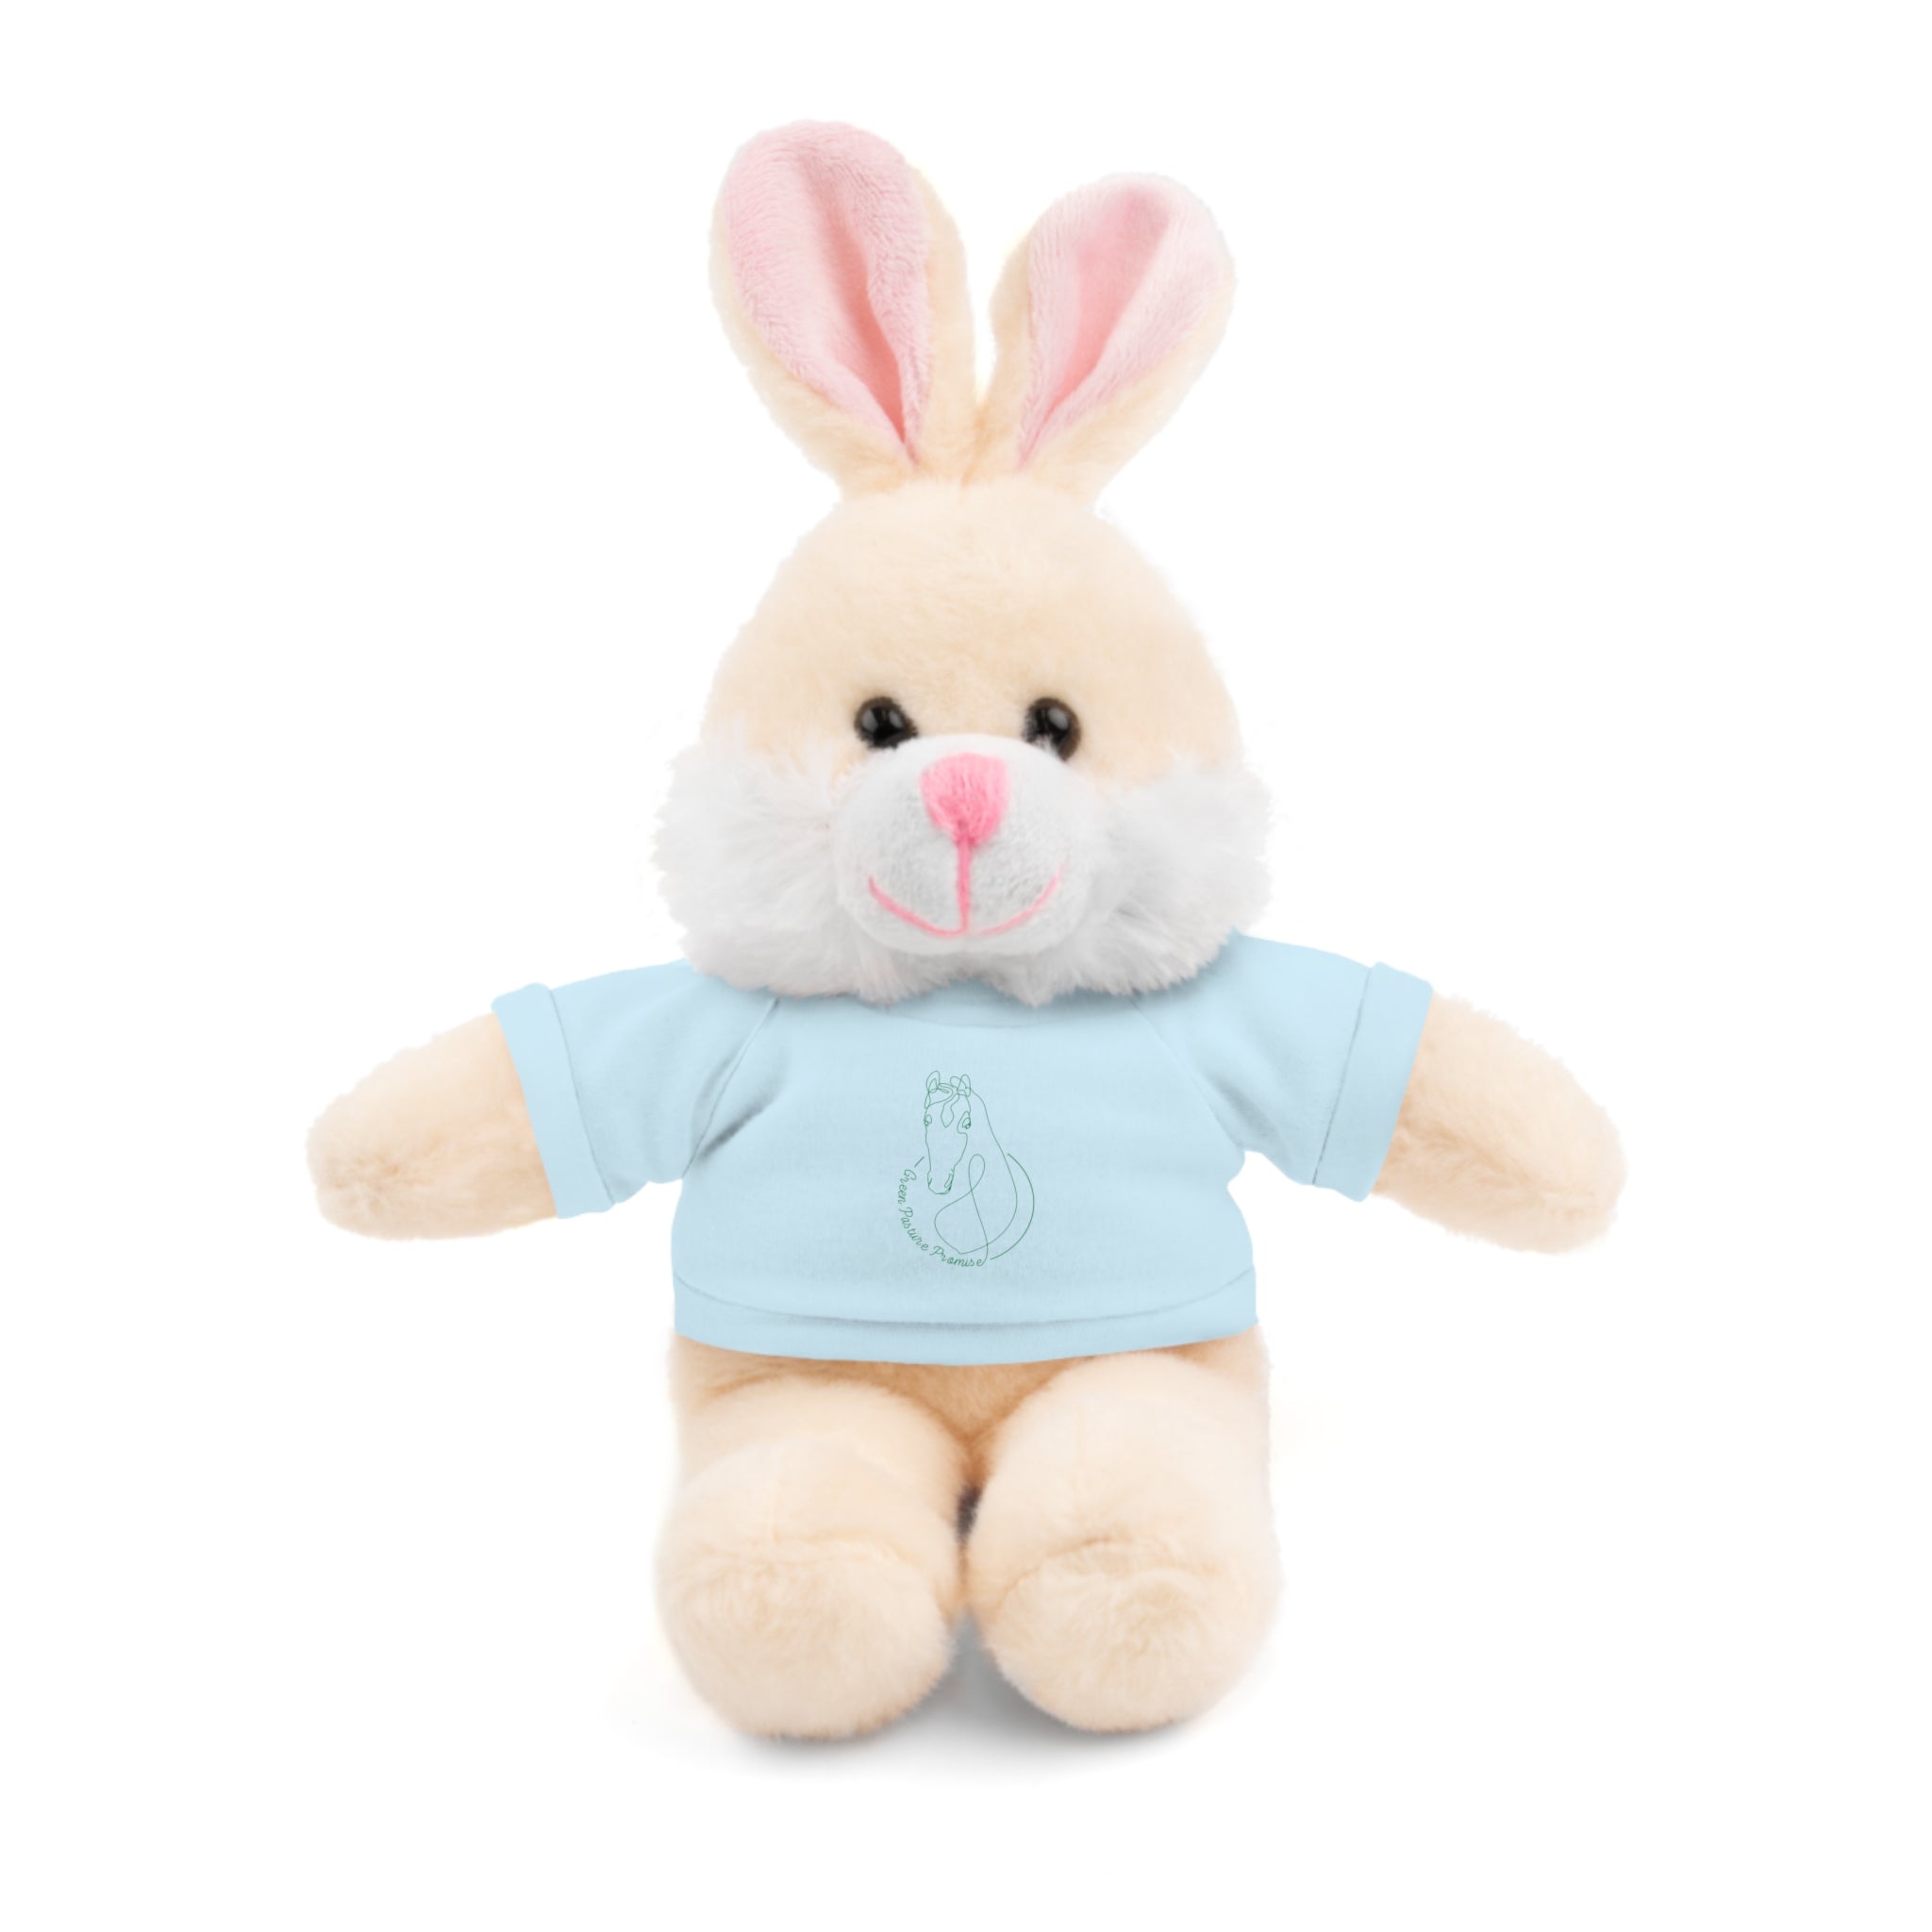 Stuffed Animals with Green Pasture Promise Tee